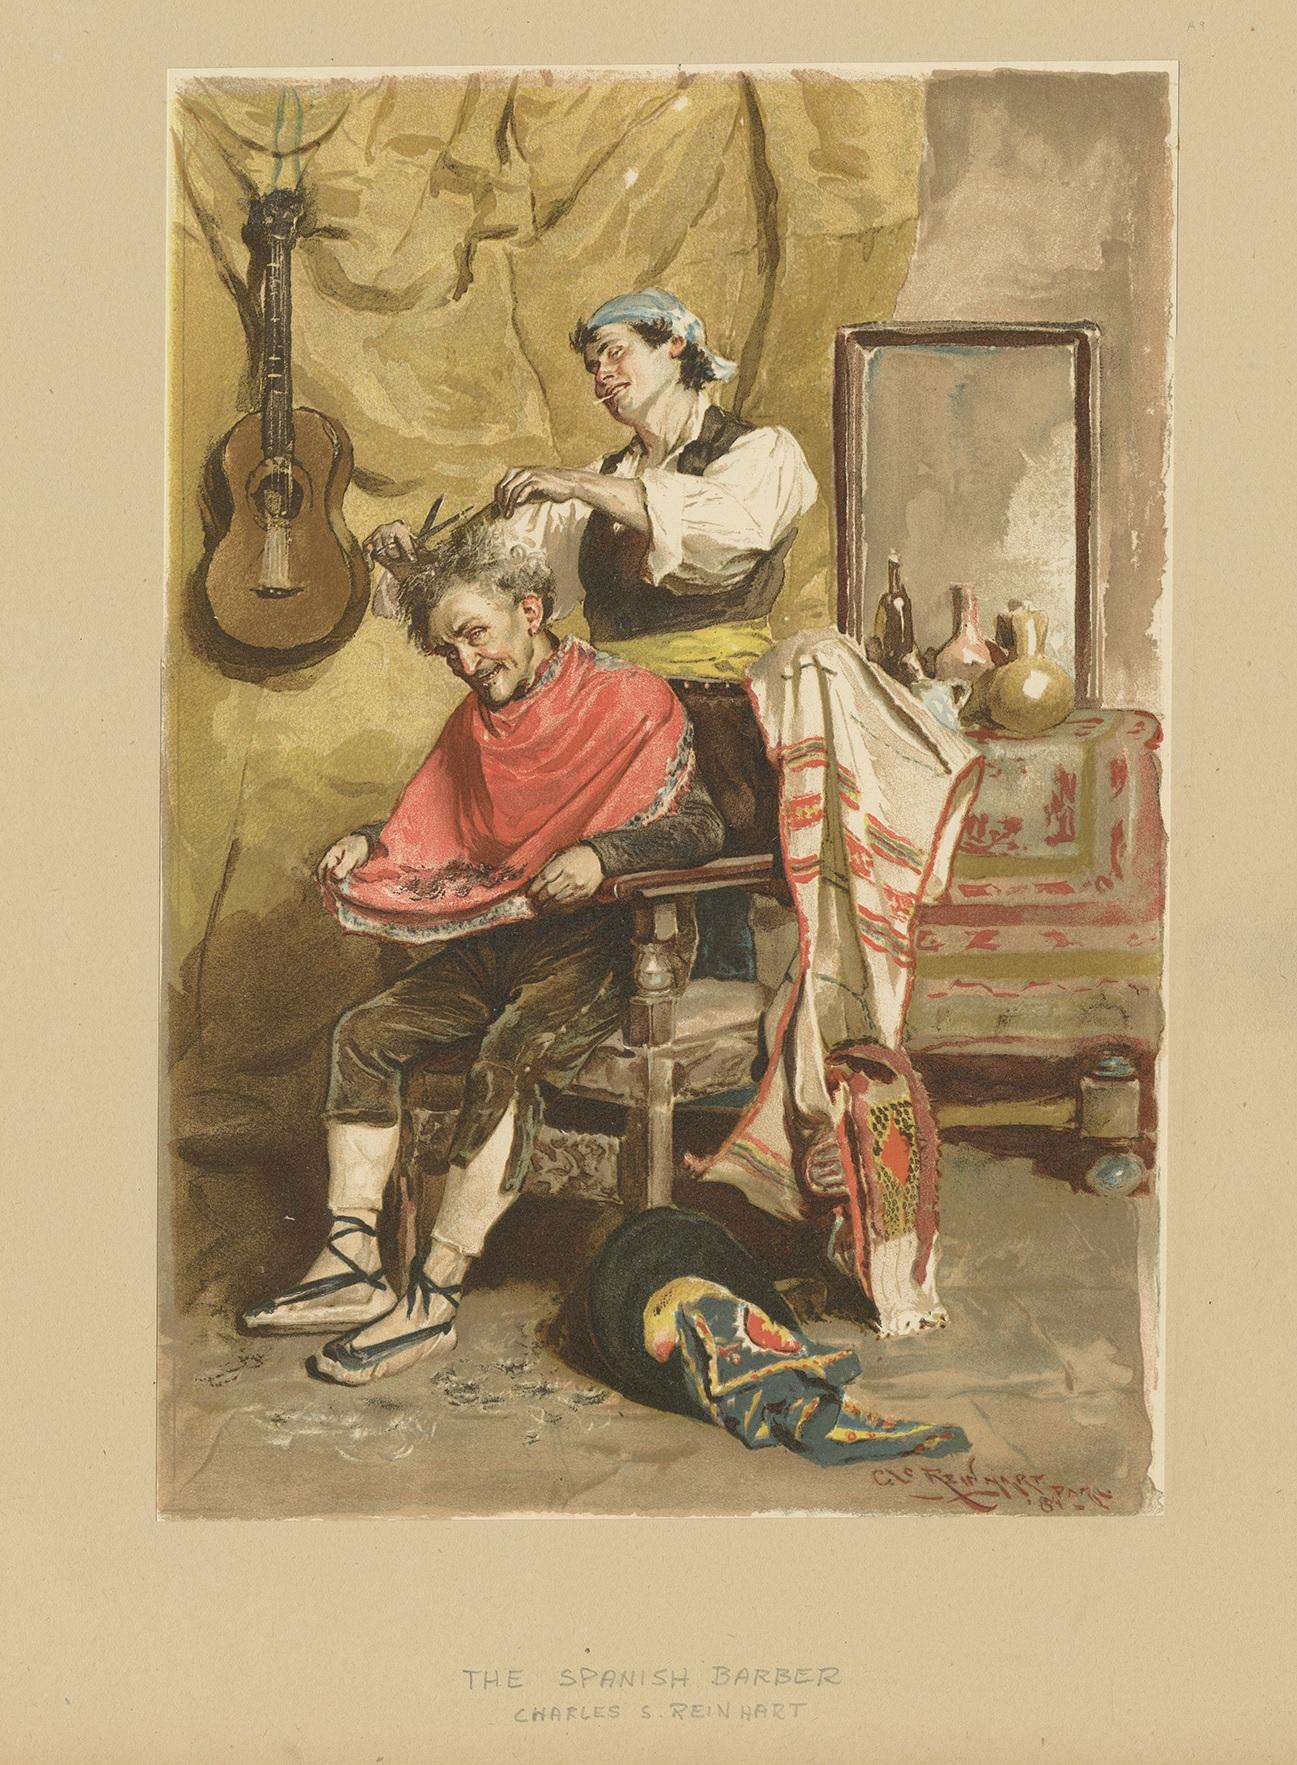 Antique print titled 'The Spanish Barber'. Old color photogravure made after a painting by Charles S. Reinhart. Published, circa 1893.